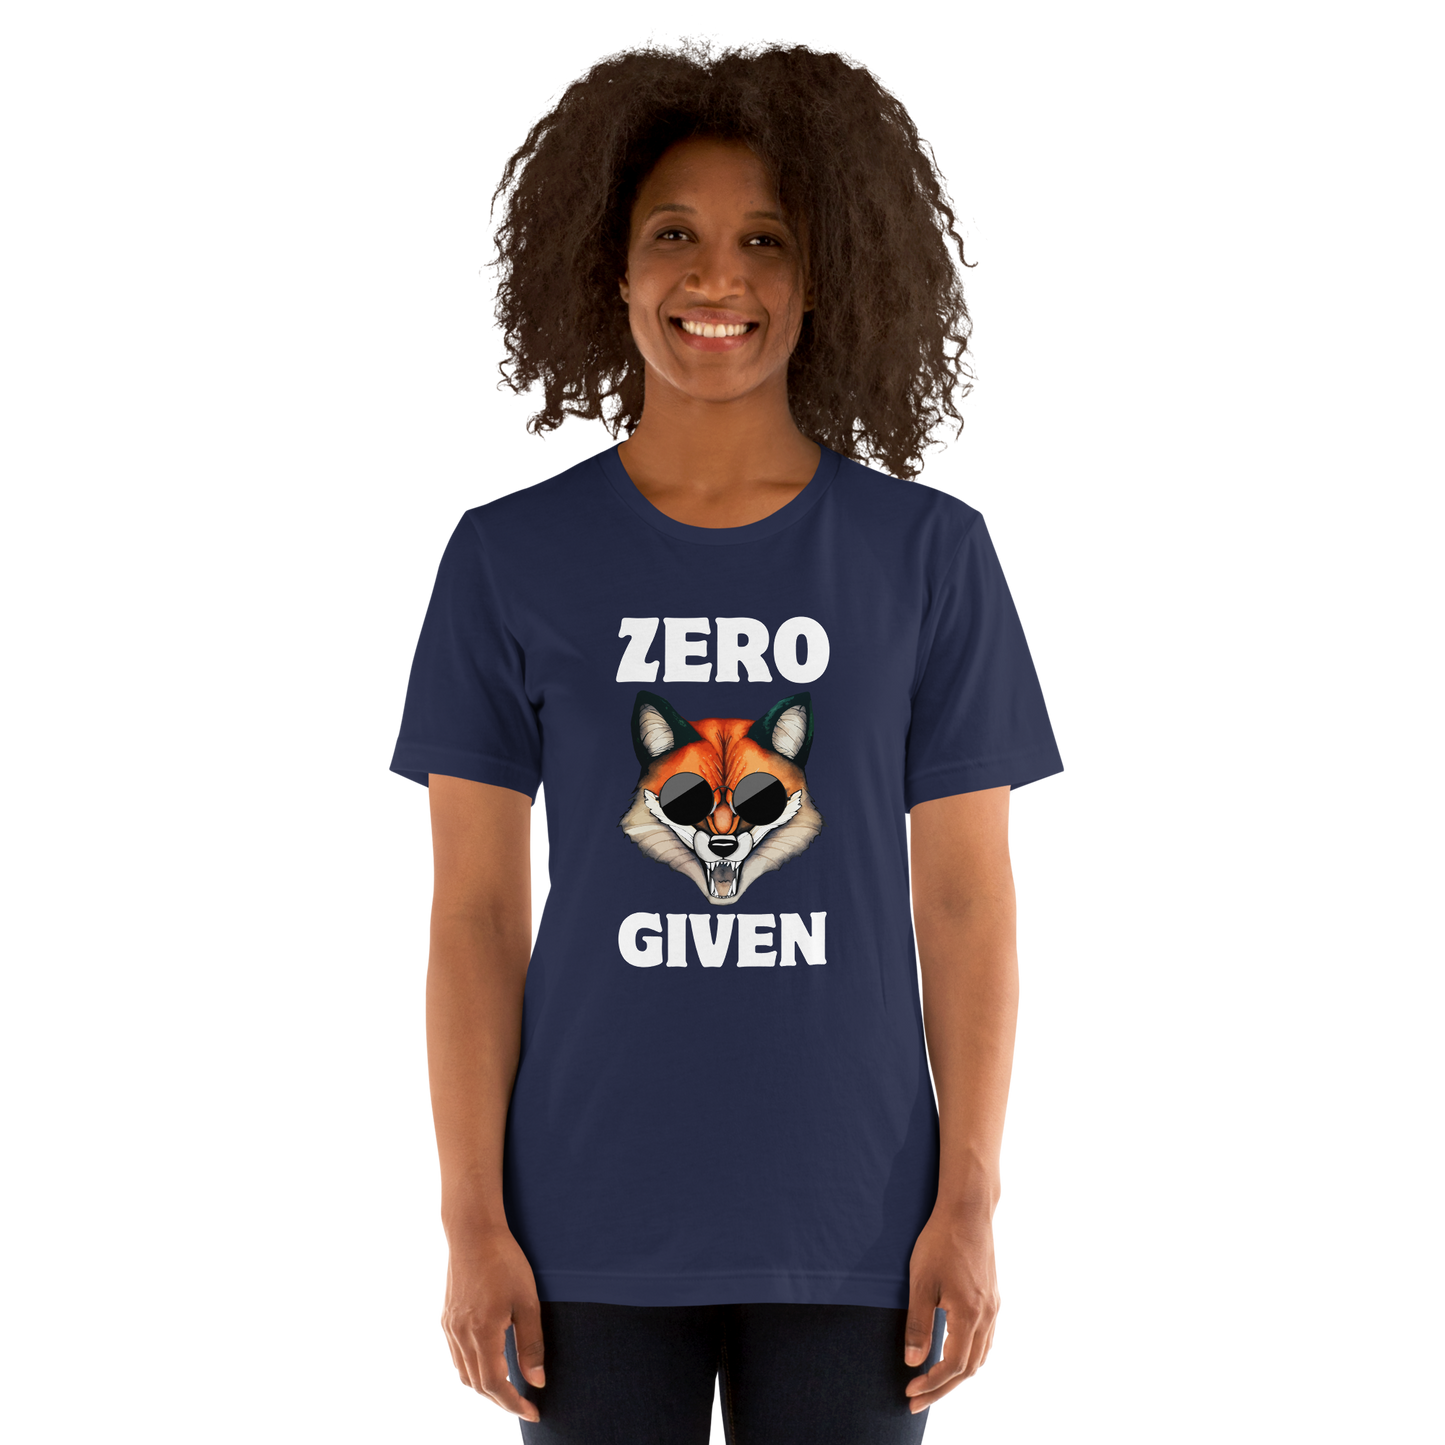 Woman wearing a Navy Premium Fox Tee featuring a Zero Fox Given graphic on the chest - Funny Graphic Fox Tees - Boozy Fox